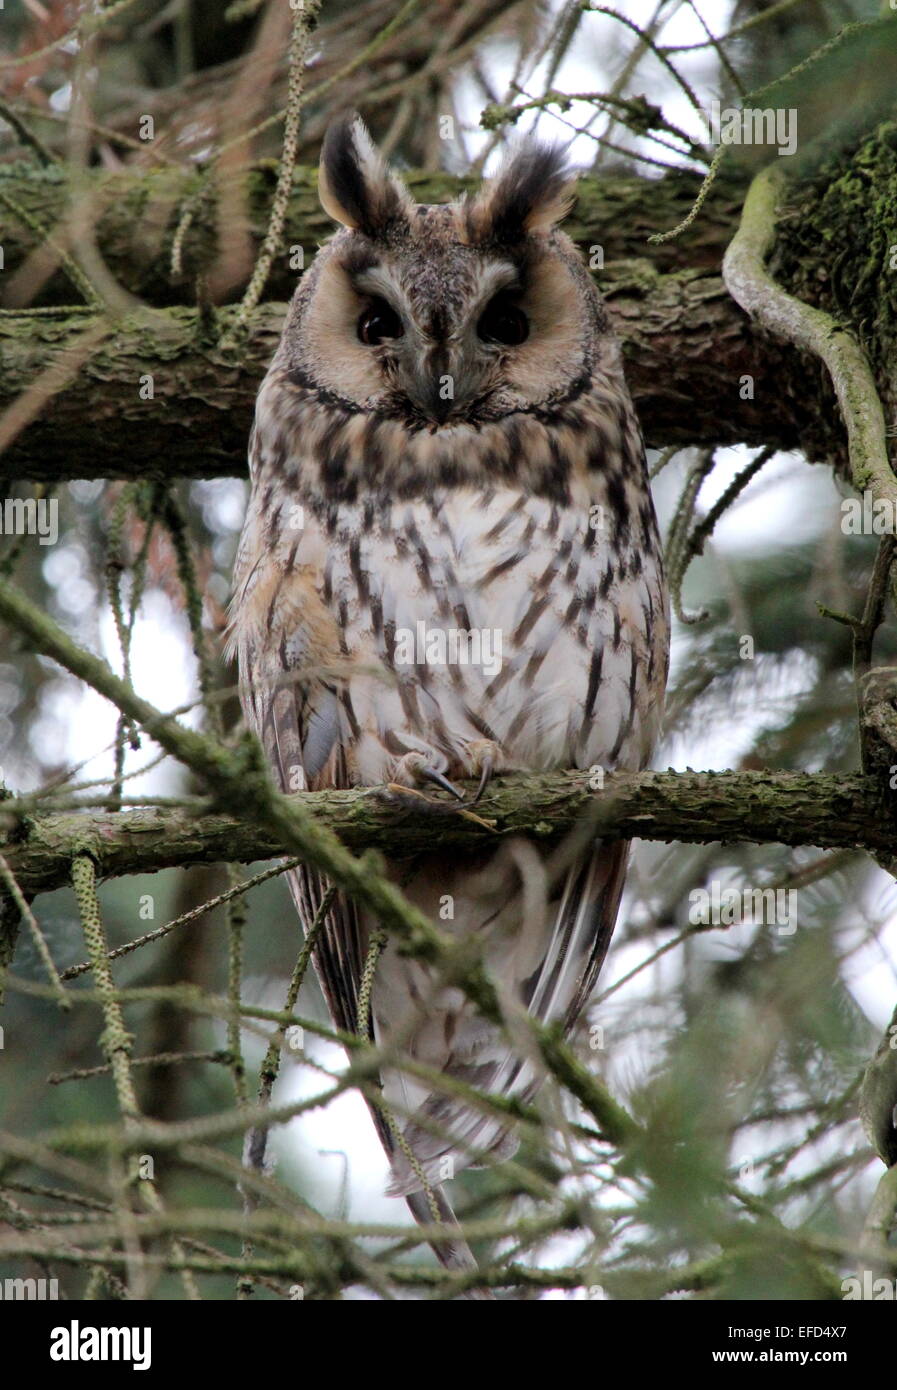 Long-eared Owl (Asio otus) in a pine tree during daytime, facing camera Stock Photo